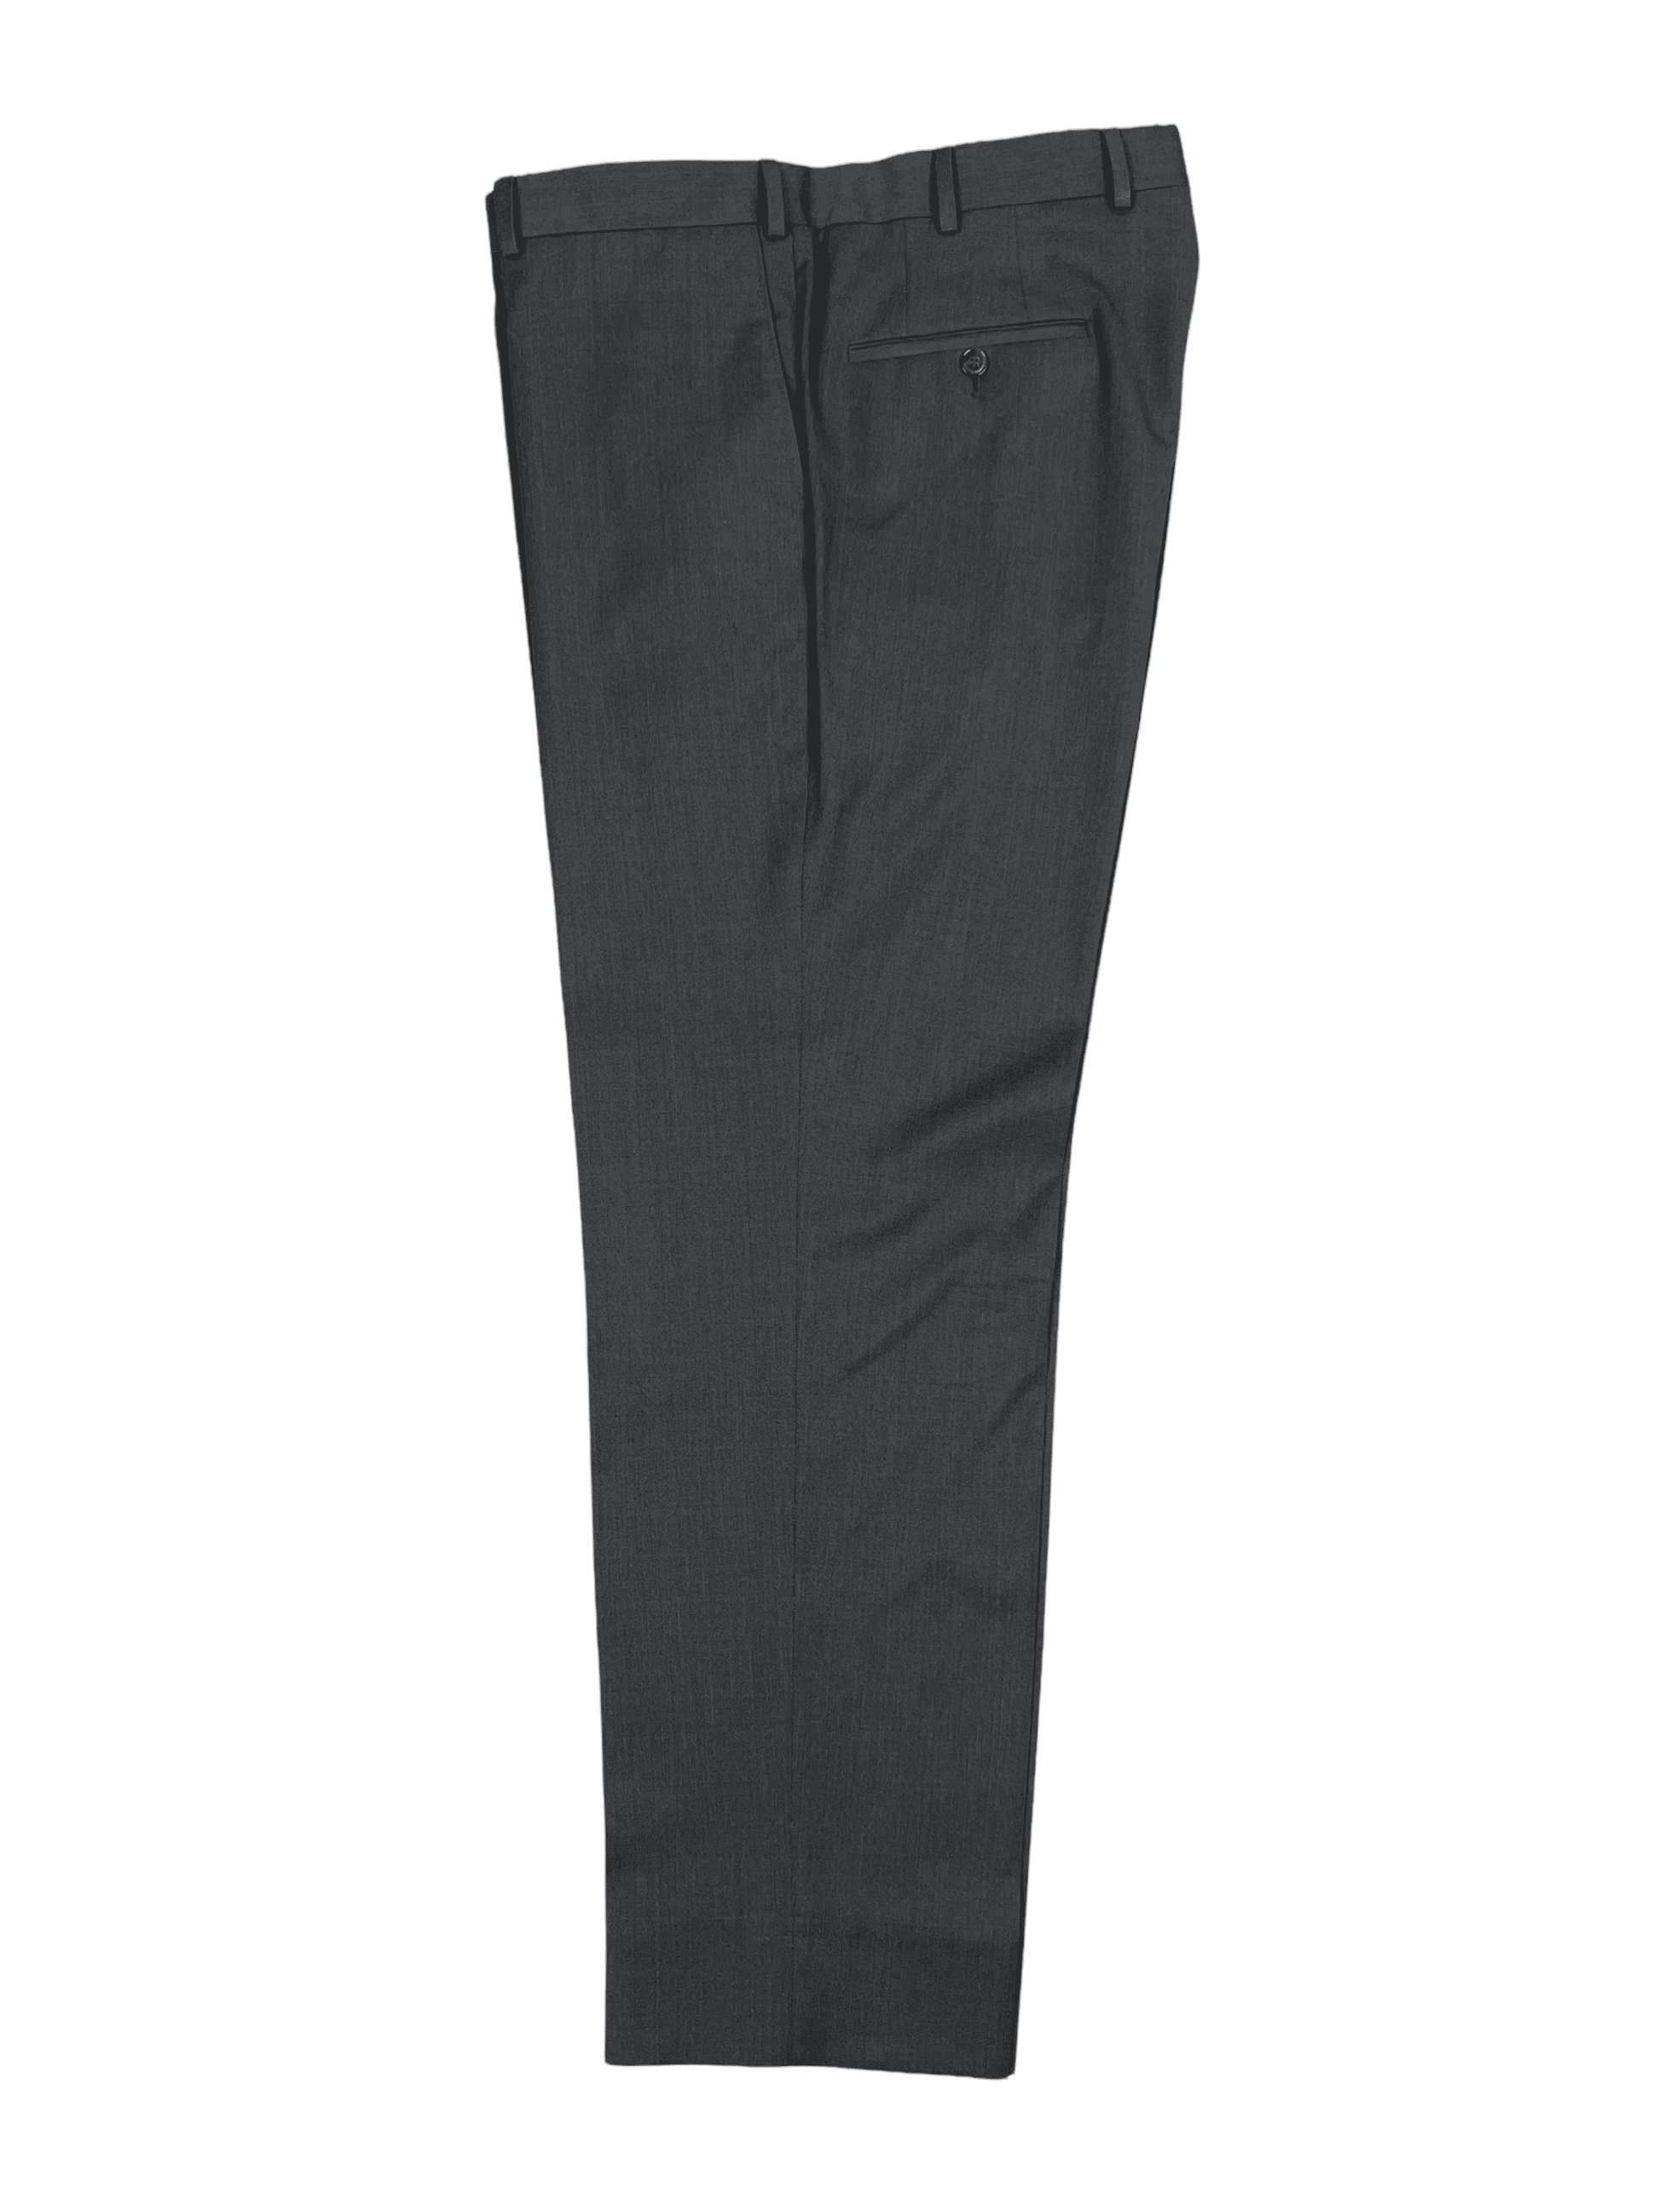 Samuelsohn Charcoal Wool Pants 40 x 32 - Genuine Design Luxury Consignment for Men. New & Pre-Owned Clothing, Shoes, & Accessories. Calgary, Canada